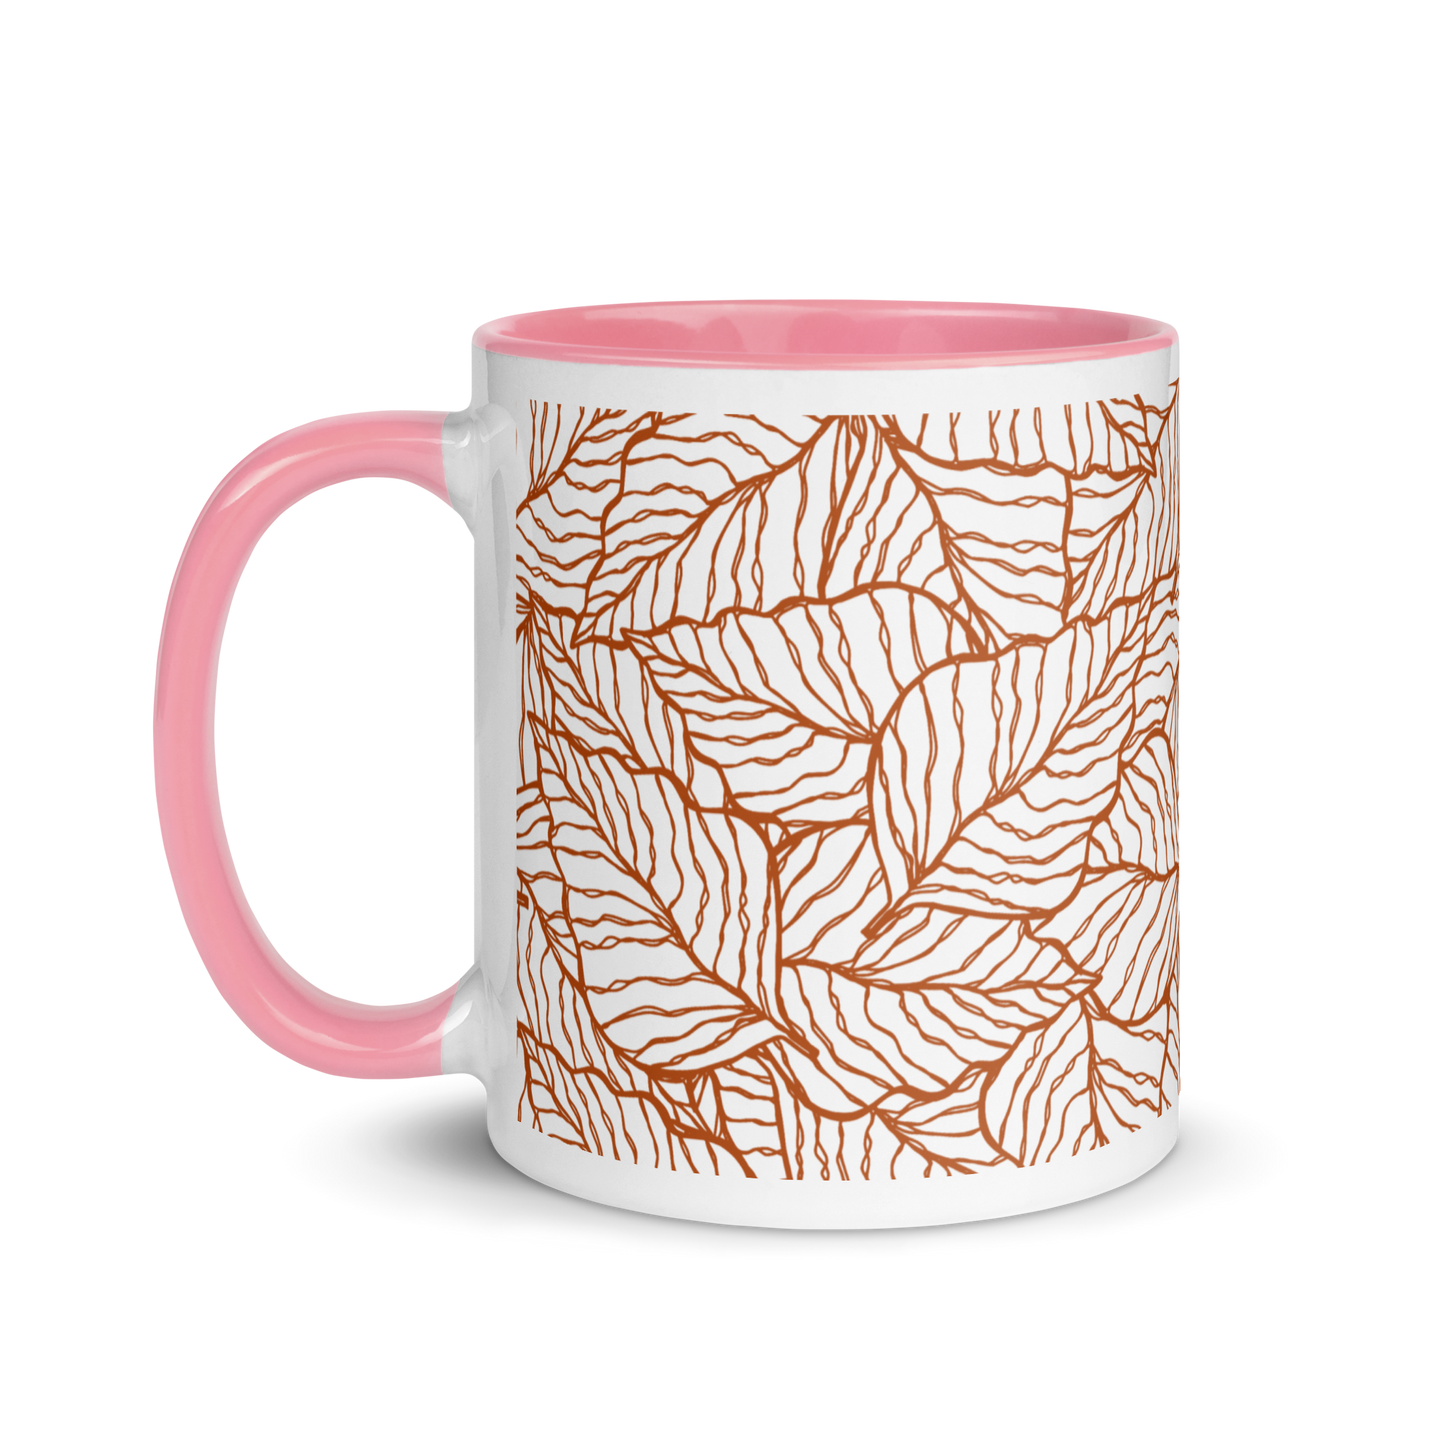 Colorful Fall Leaves | Seamless Patterns | White Ceramic Mug with Color Inside - #1